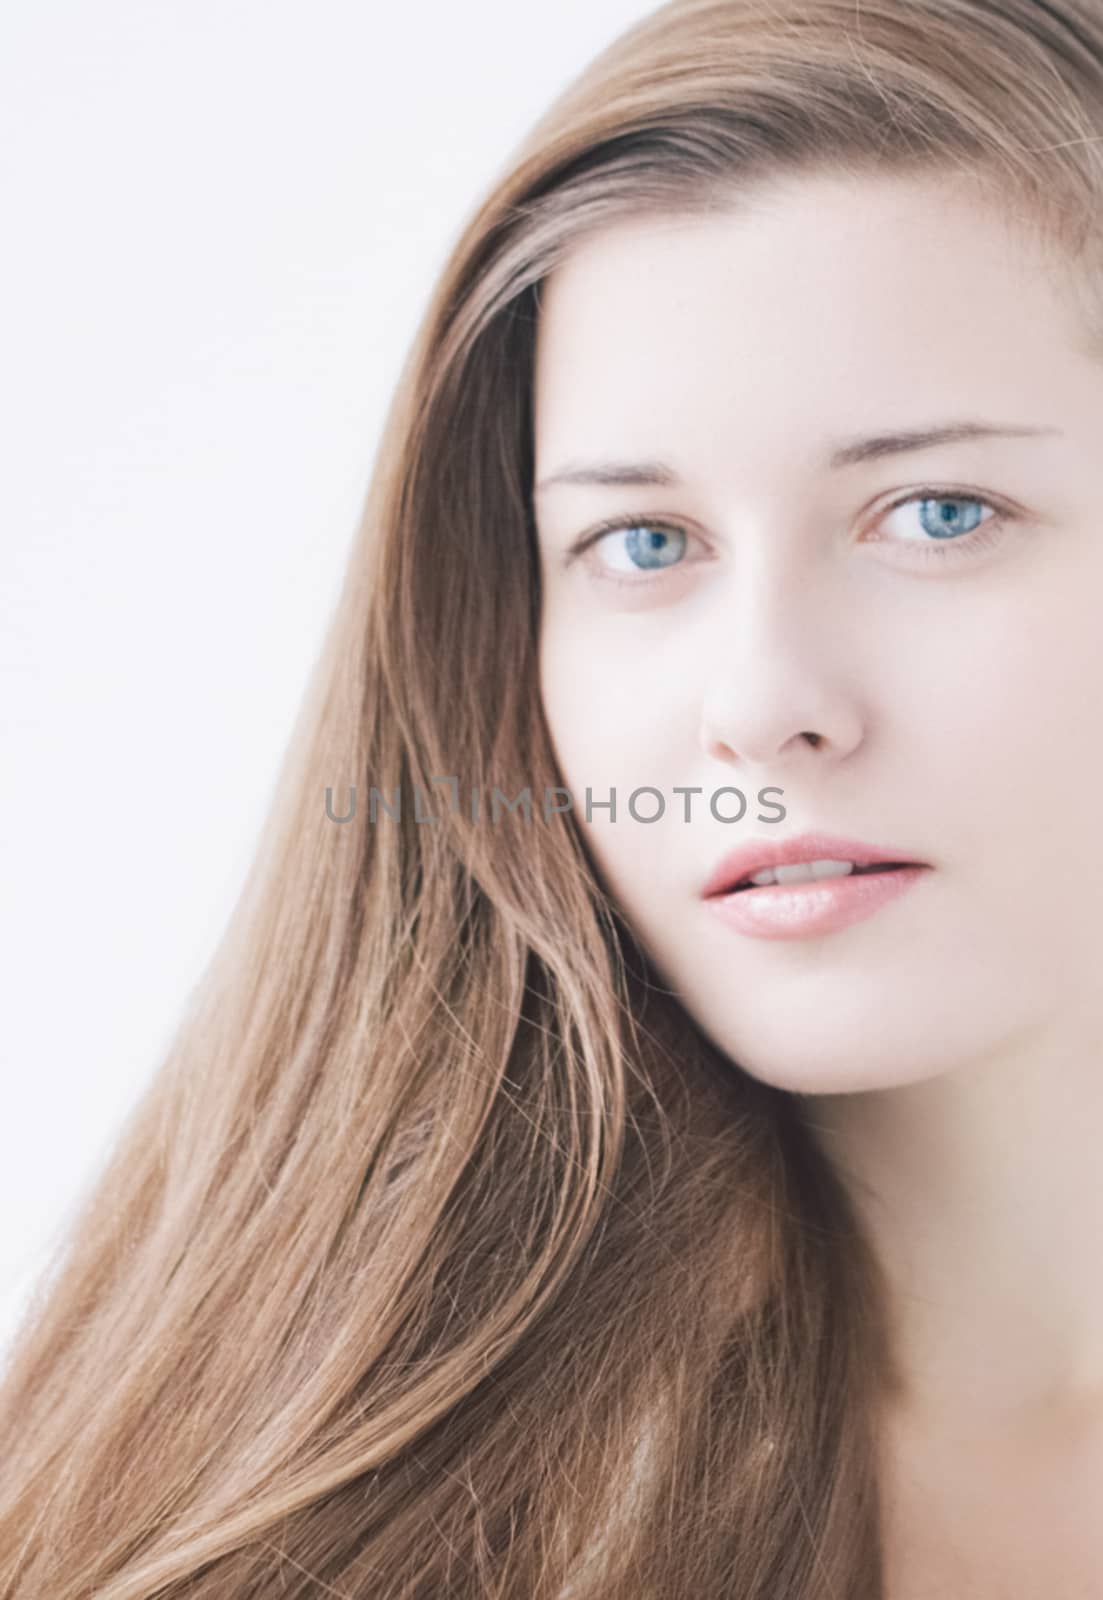 Woman as closeup beauty face portrait, young model with natural makeup look and long hairstyle for female hair care, cosmetic or skincare brands